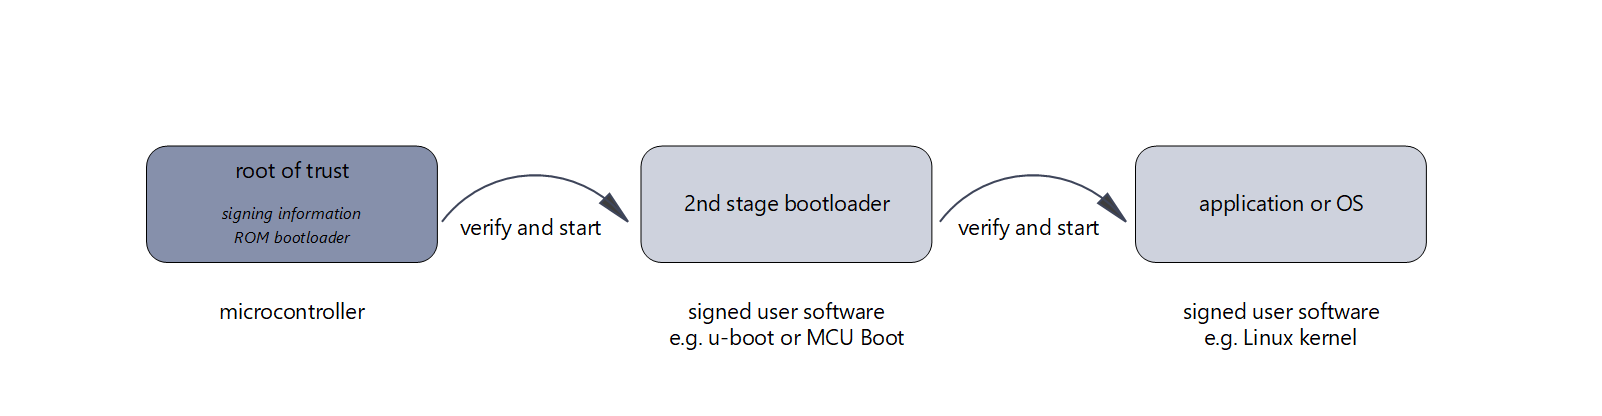 Illustration of the Secure Boot chain from Root of Trust to application